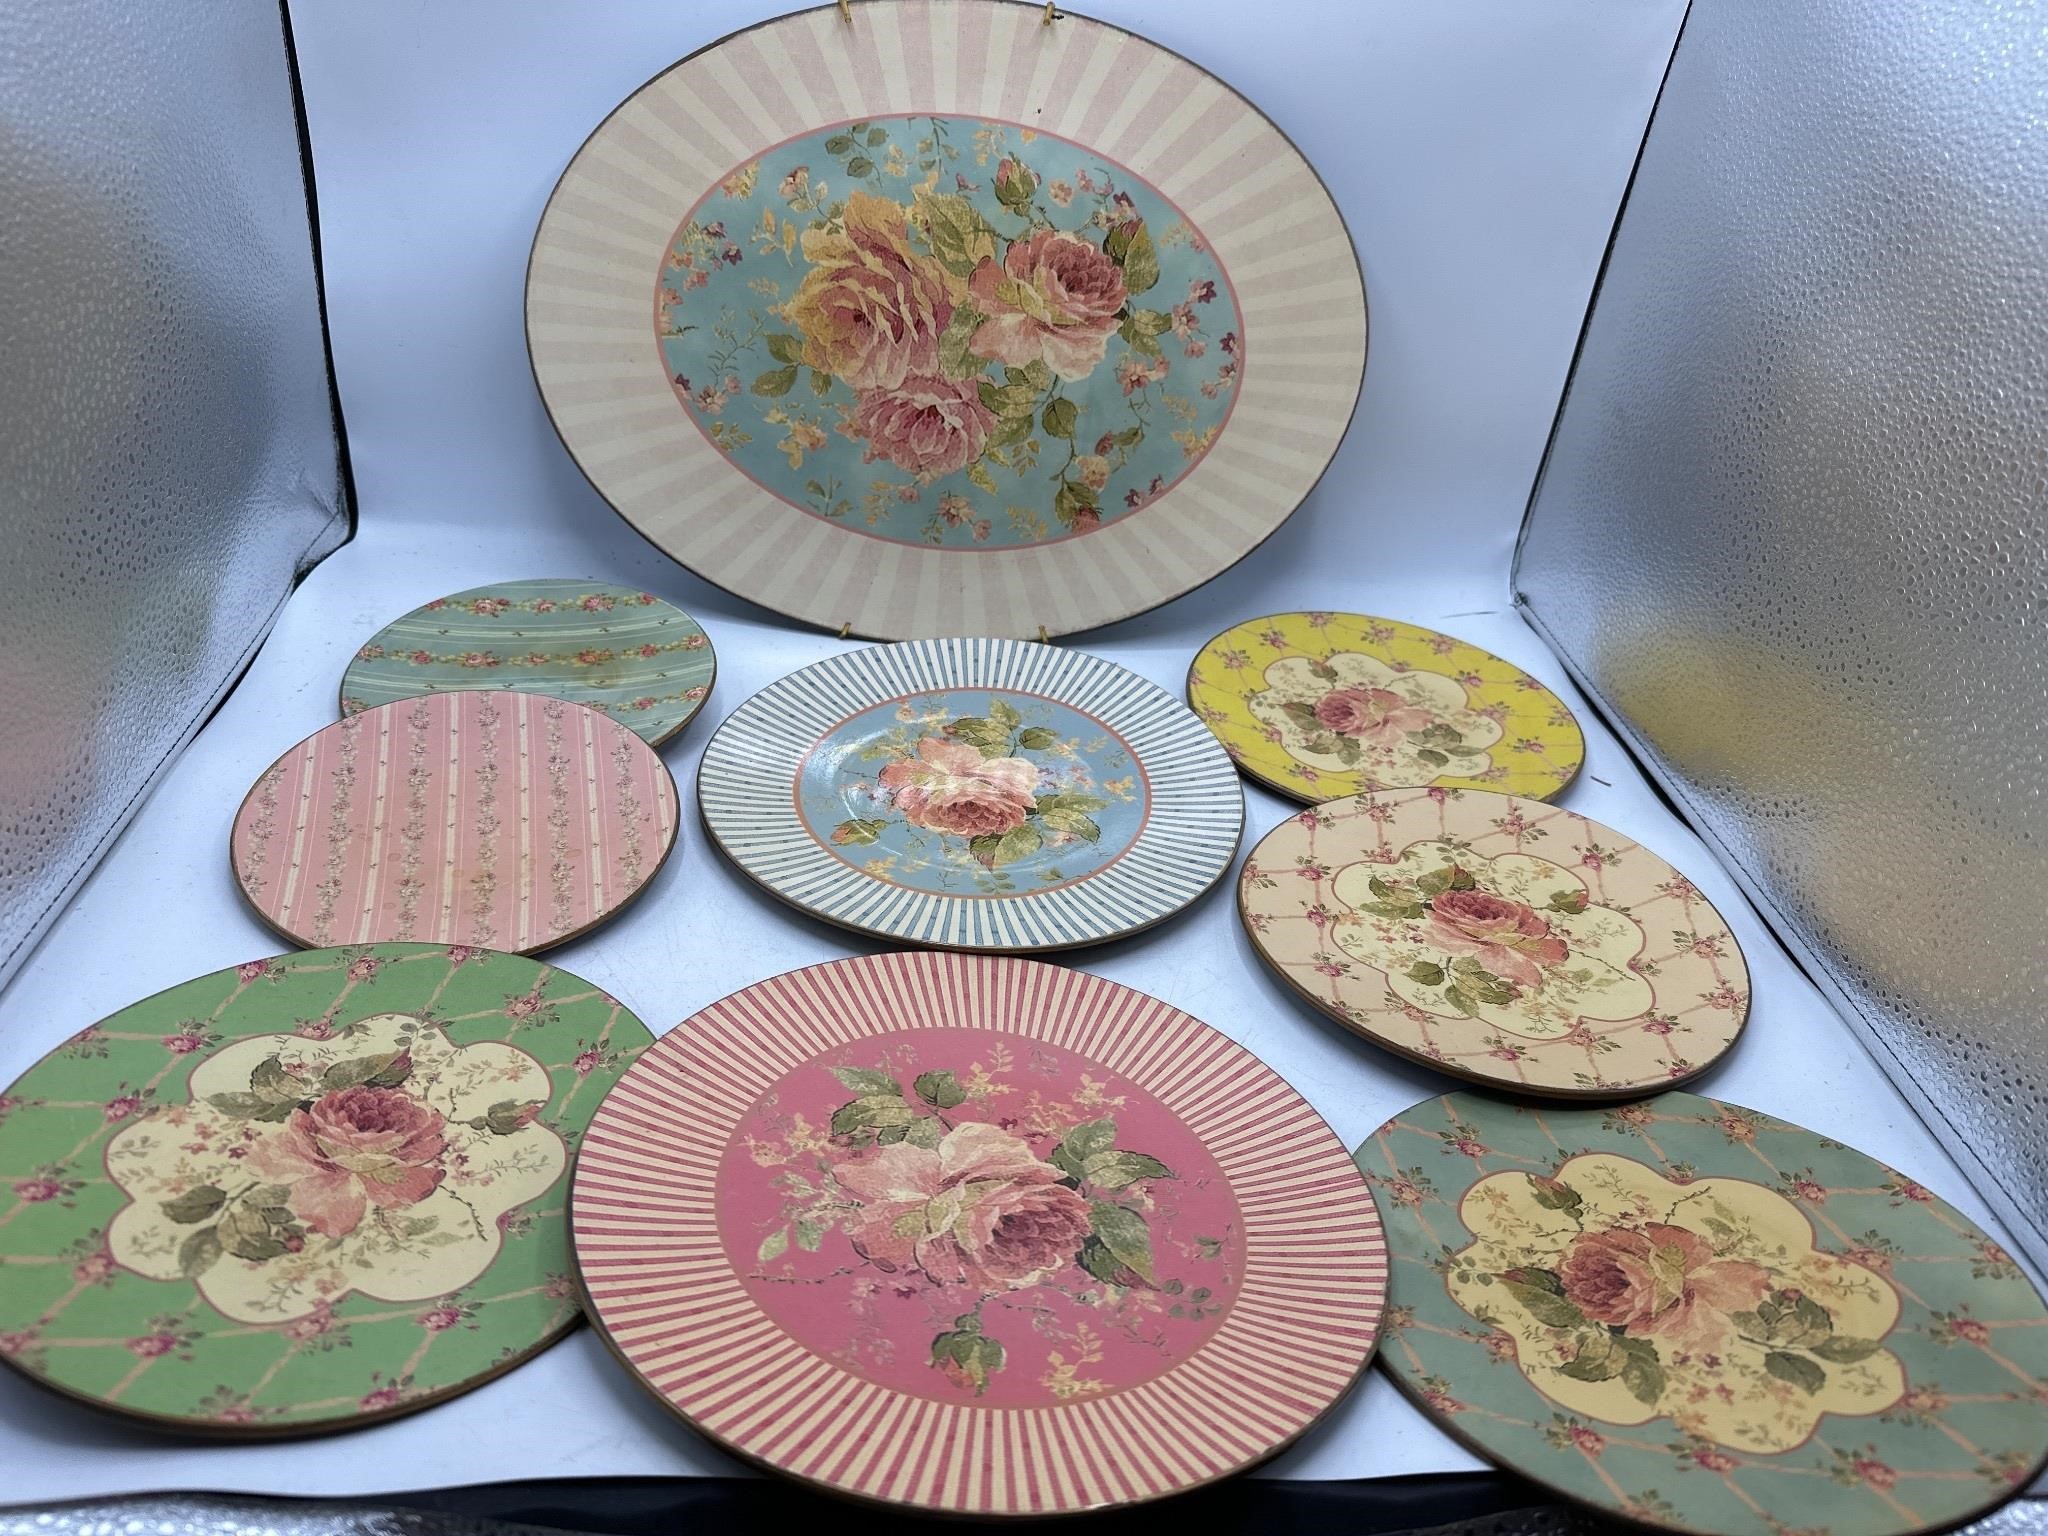 Shabby Chic Twos Company plates and platter